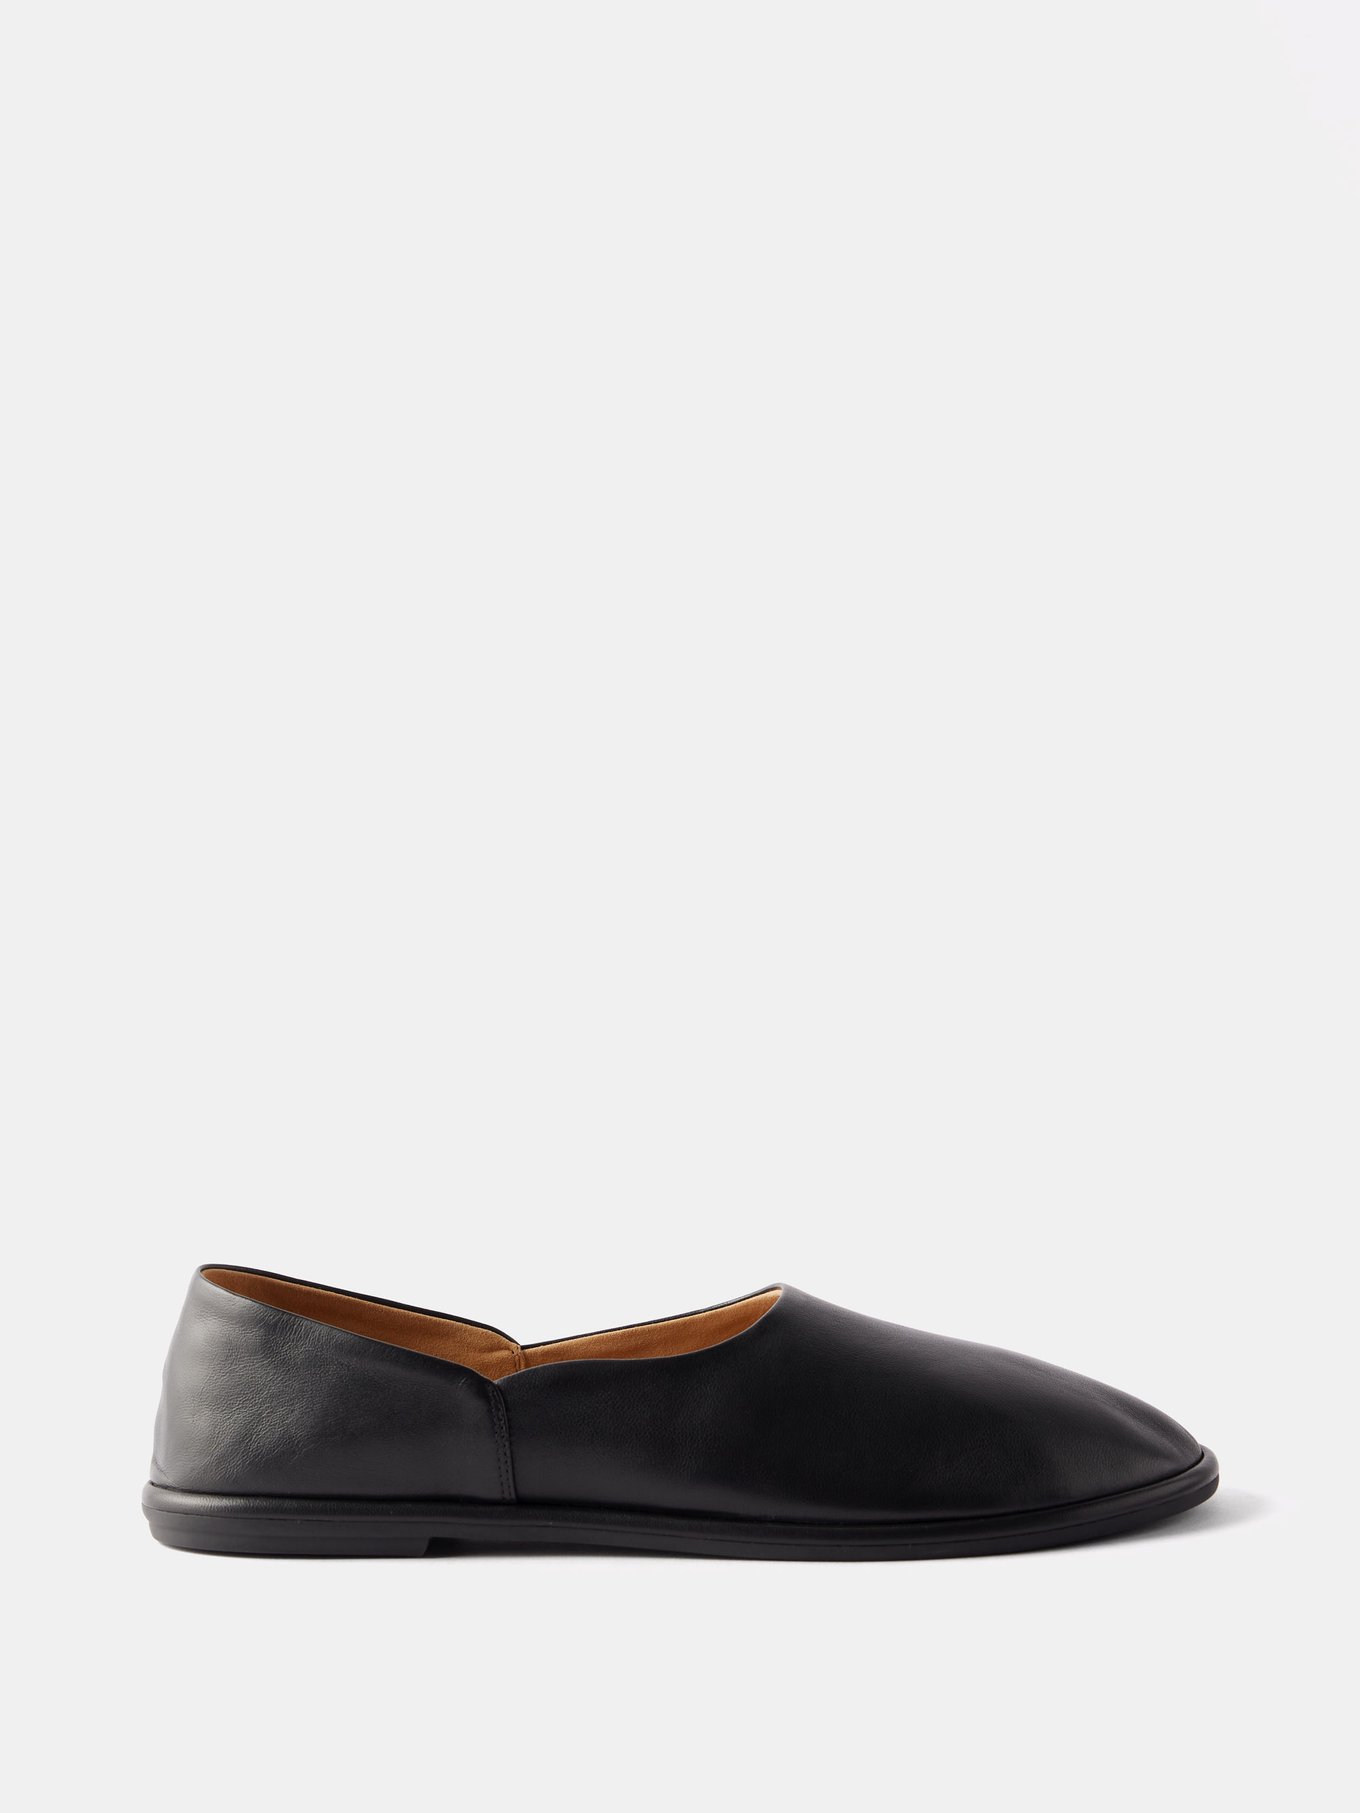 Canal collapsible-heel leather loafers | The Row